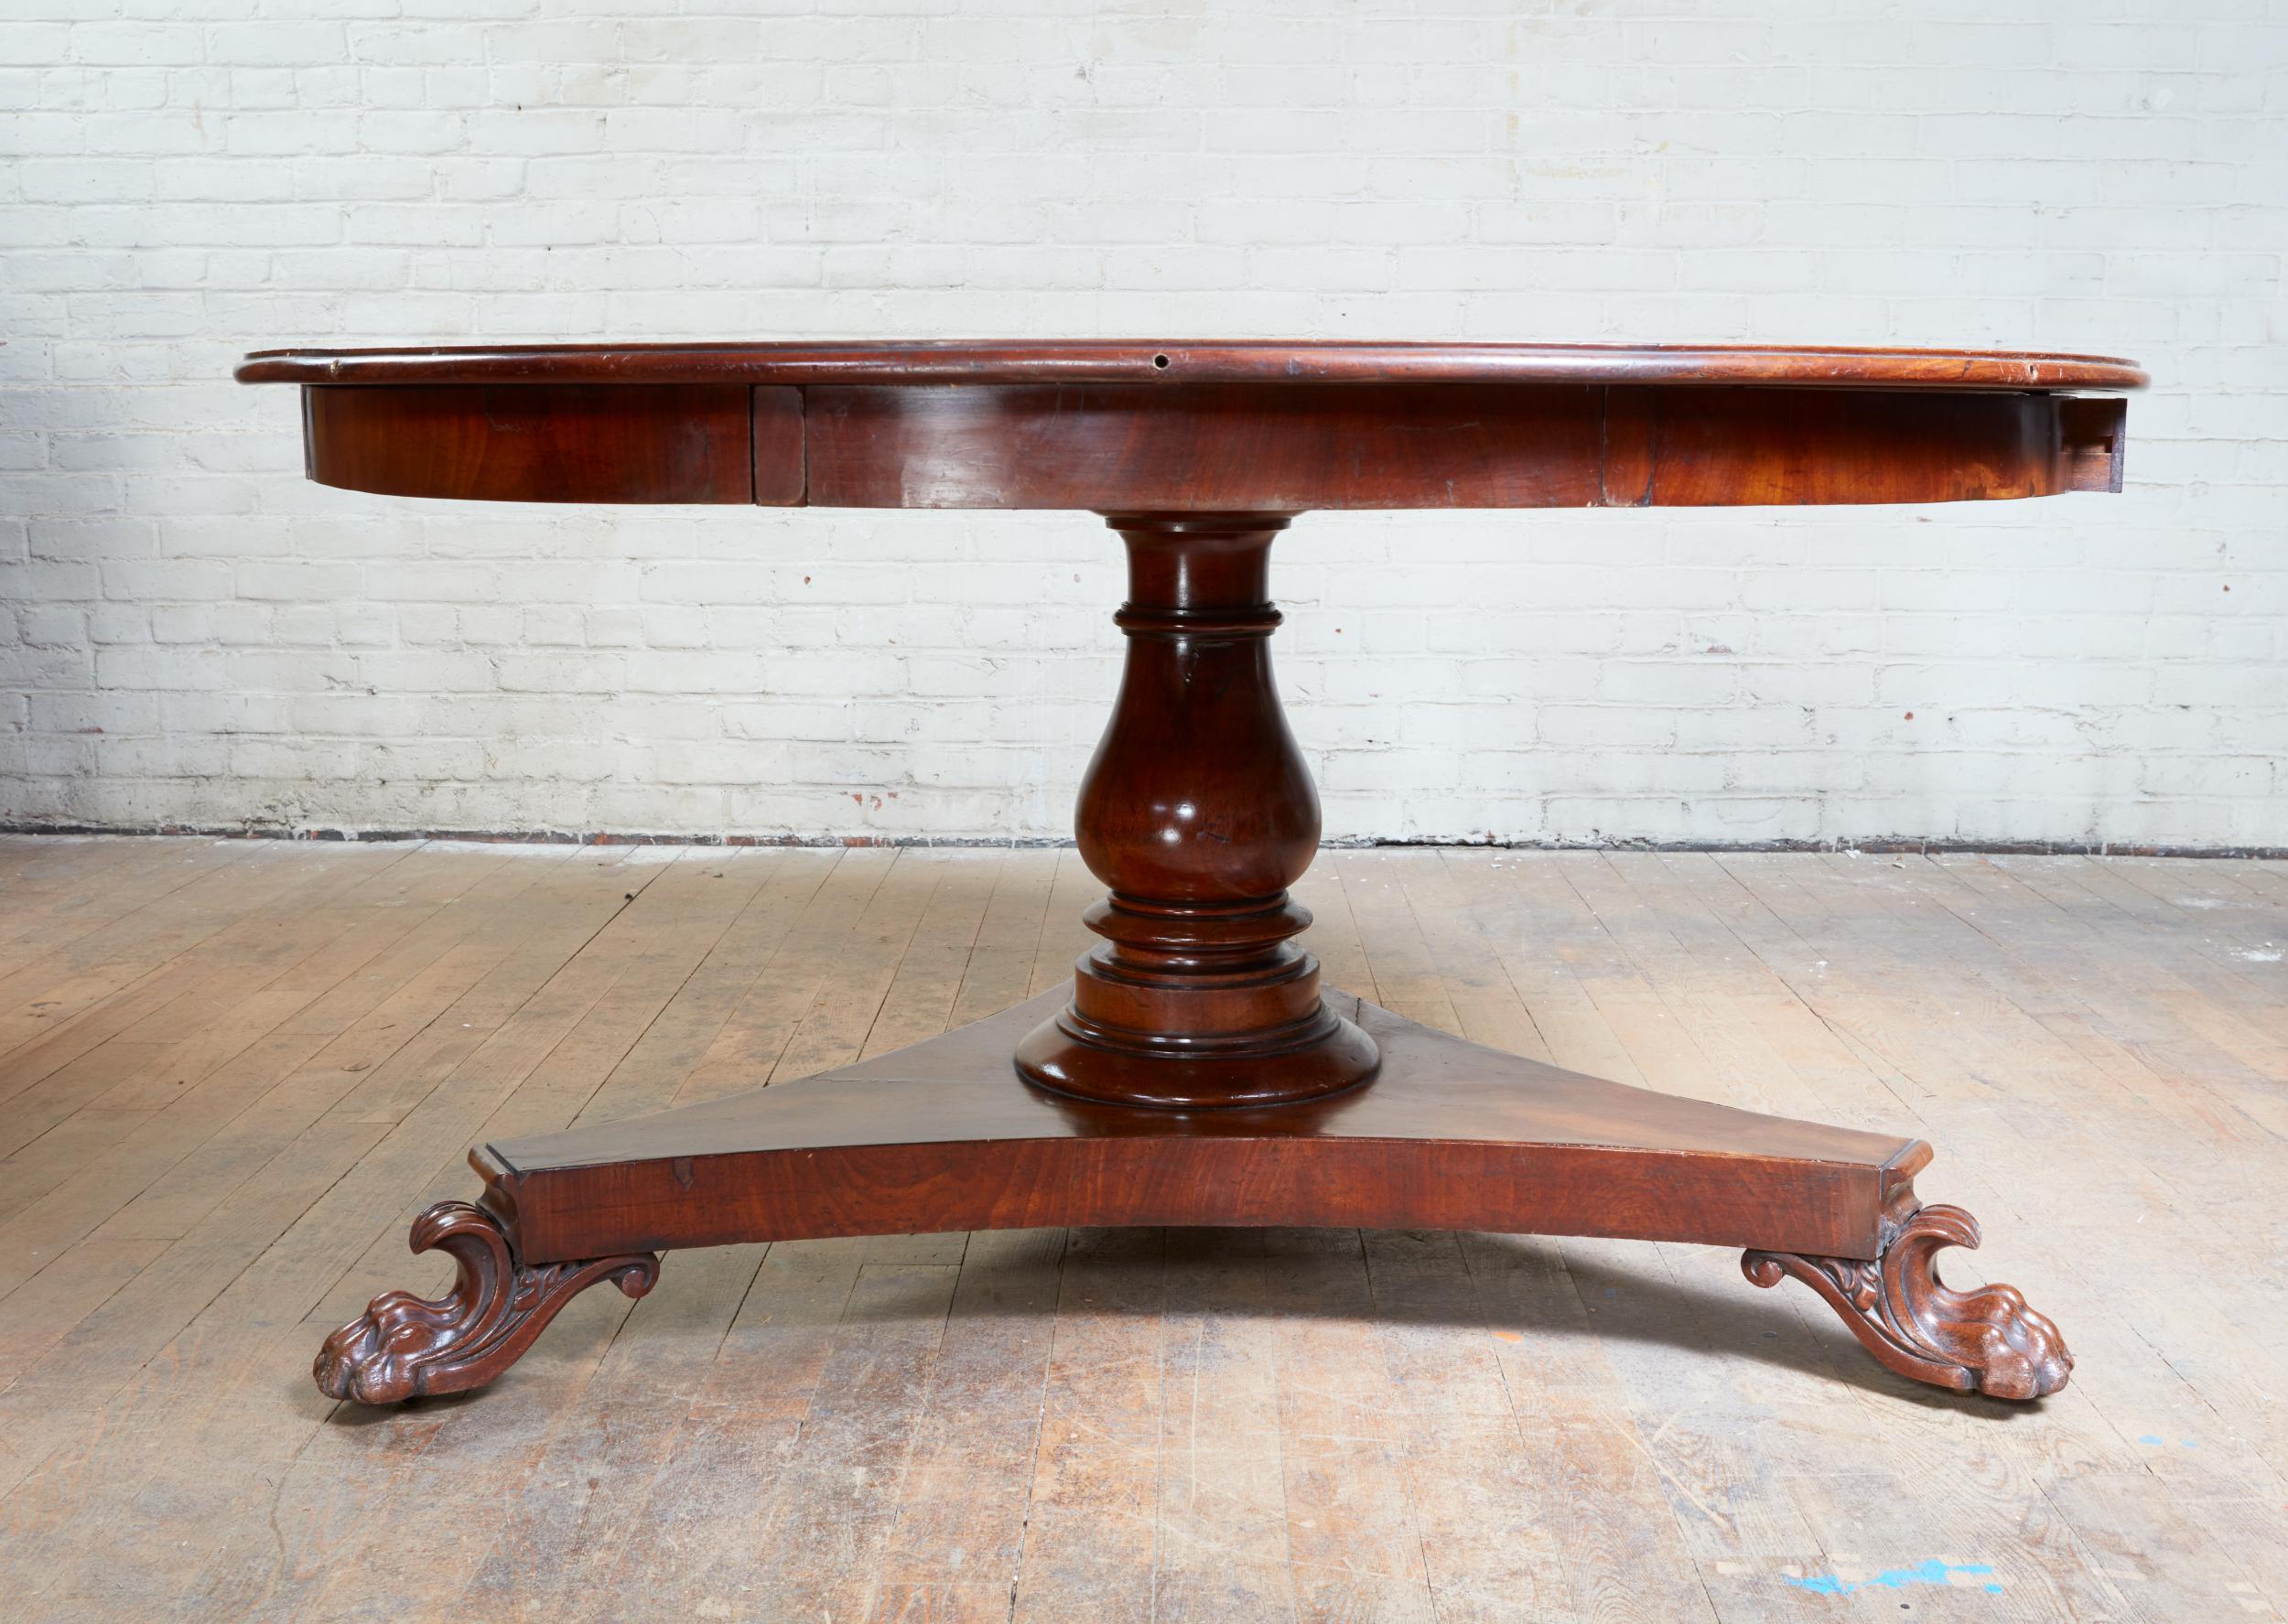 Fine and rare William IV extending circular dining table by Johnstone, Jupe and Company, circa 1835, having 8 semi elliptical leaves supported by pullout / pull-out lopers, surrounding a fixed circular top, over a vase turned column, standing on